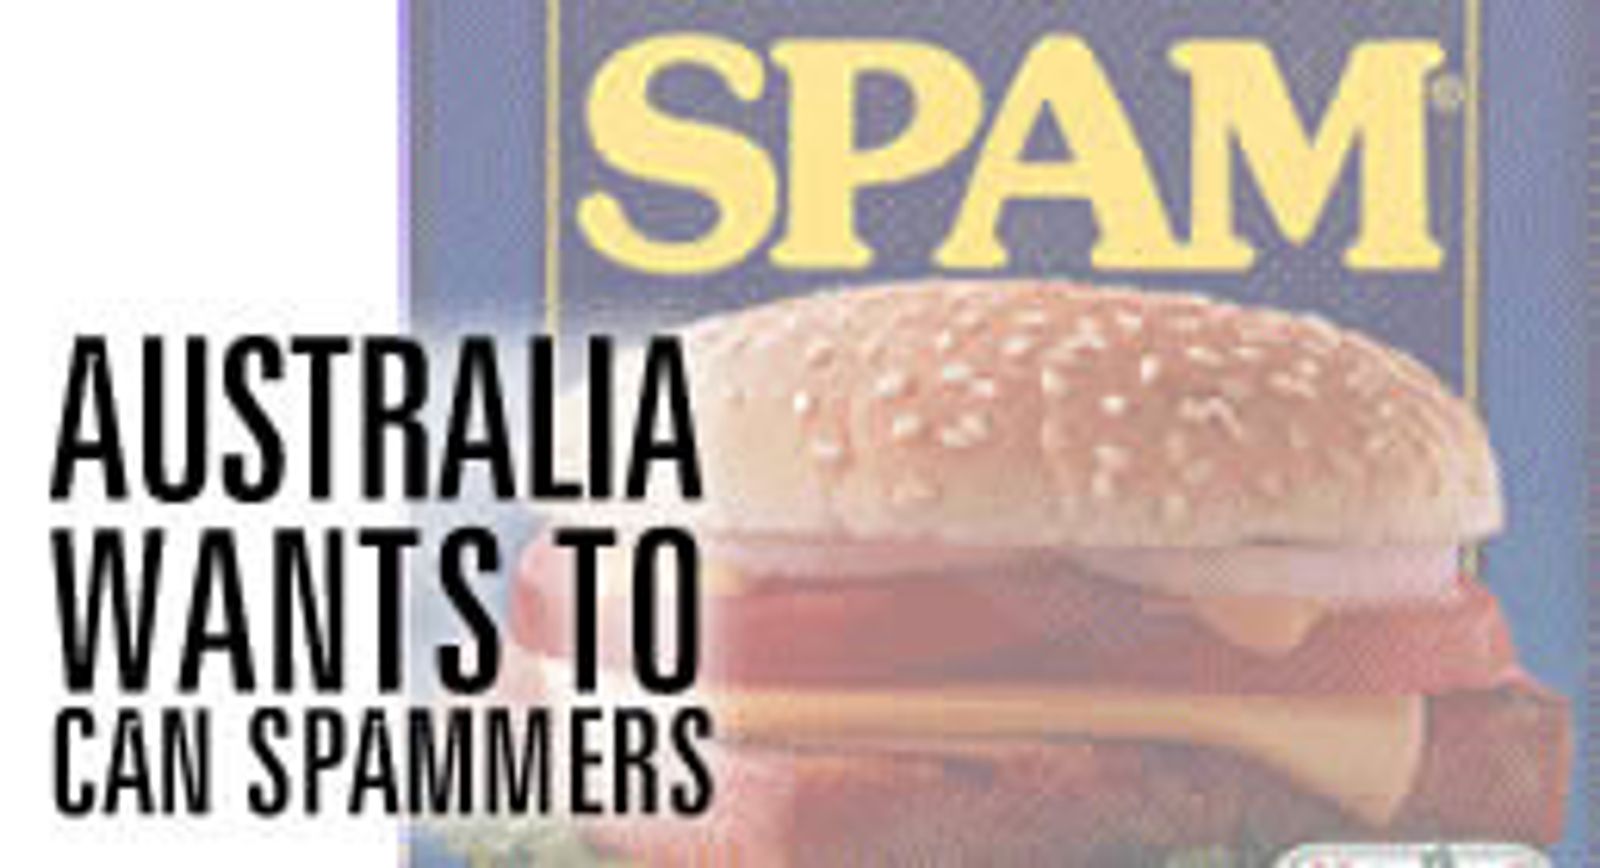 Australia Wants To Can Spammers - <I>In</I> The Can